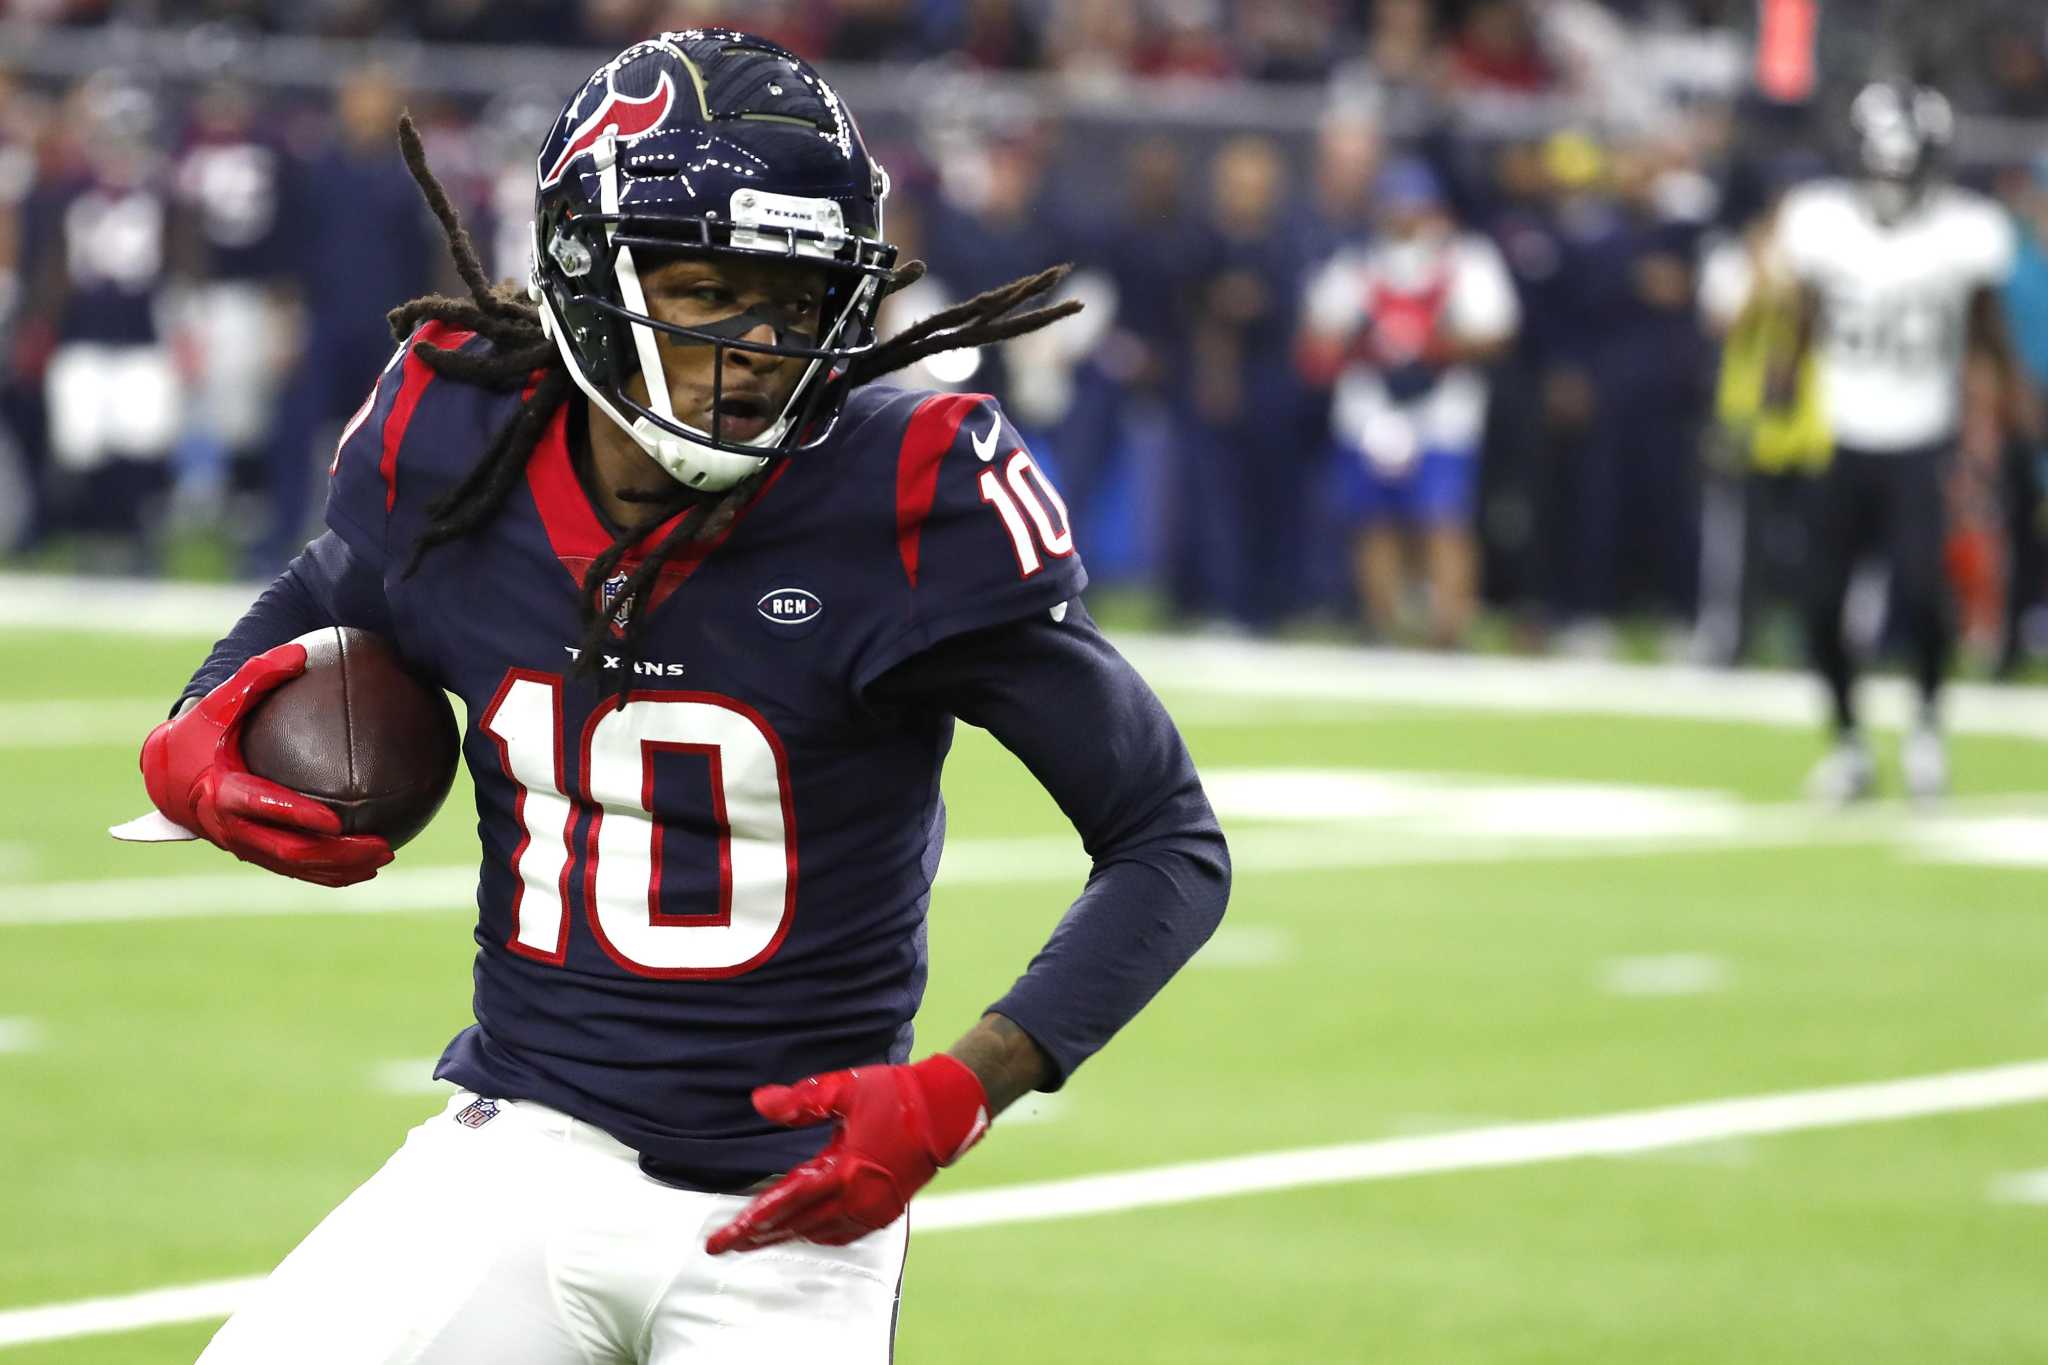 DeAndre Hopkins to announce Texans' secondround draft pick